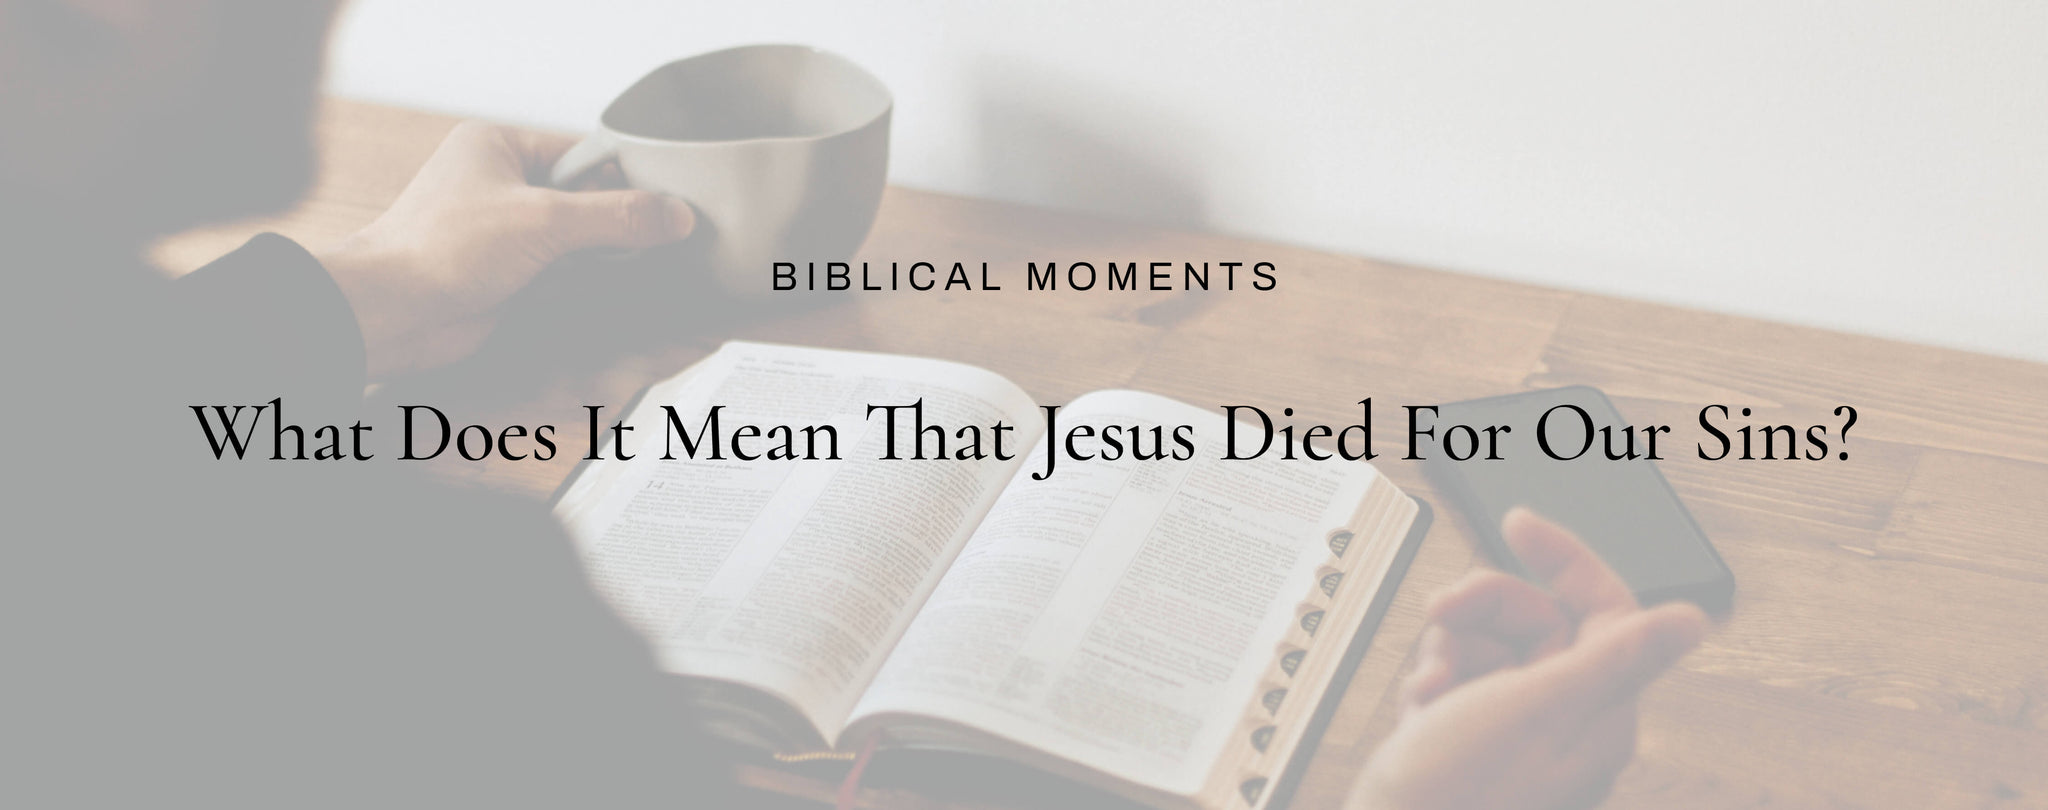 What Does it Mean that Jesus Died for our Sins?